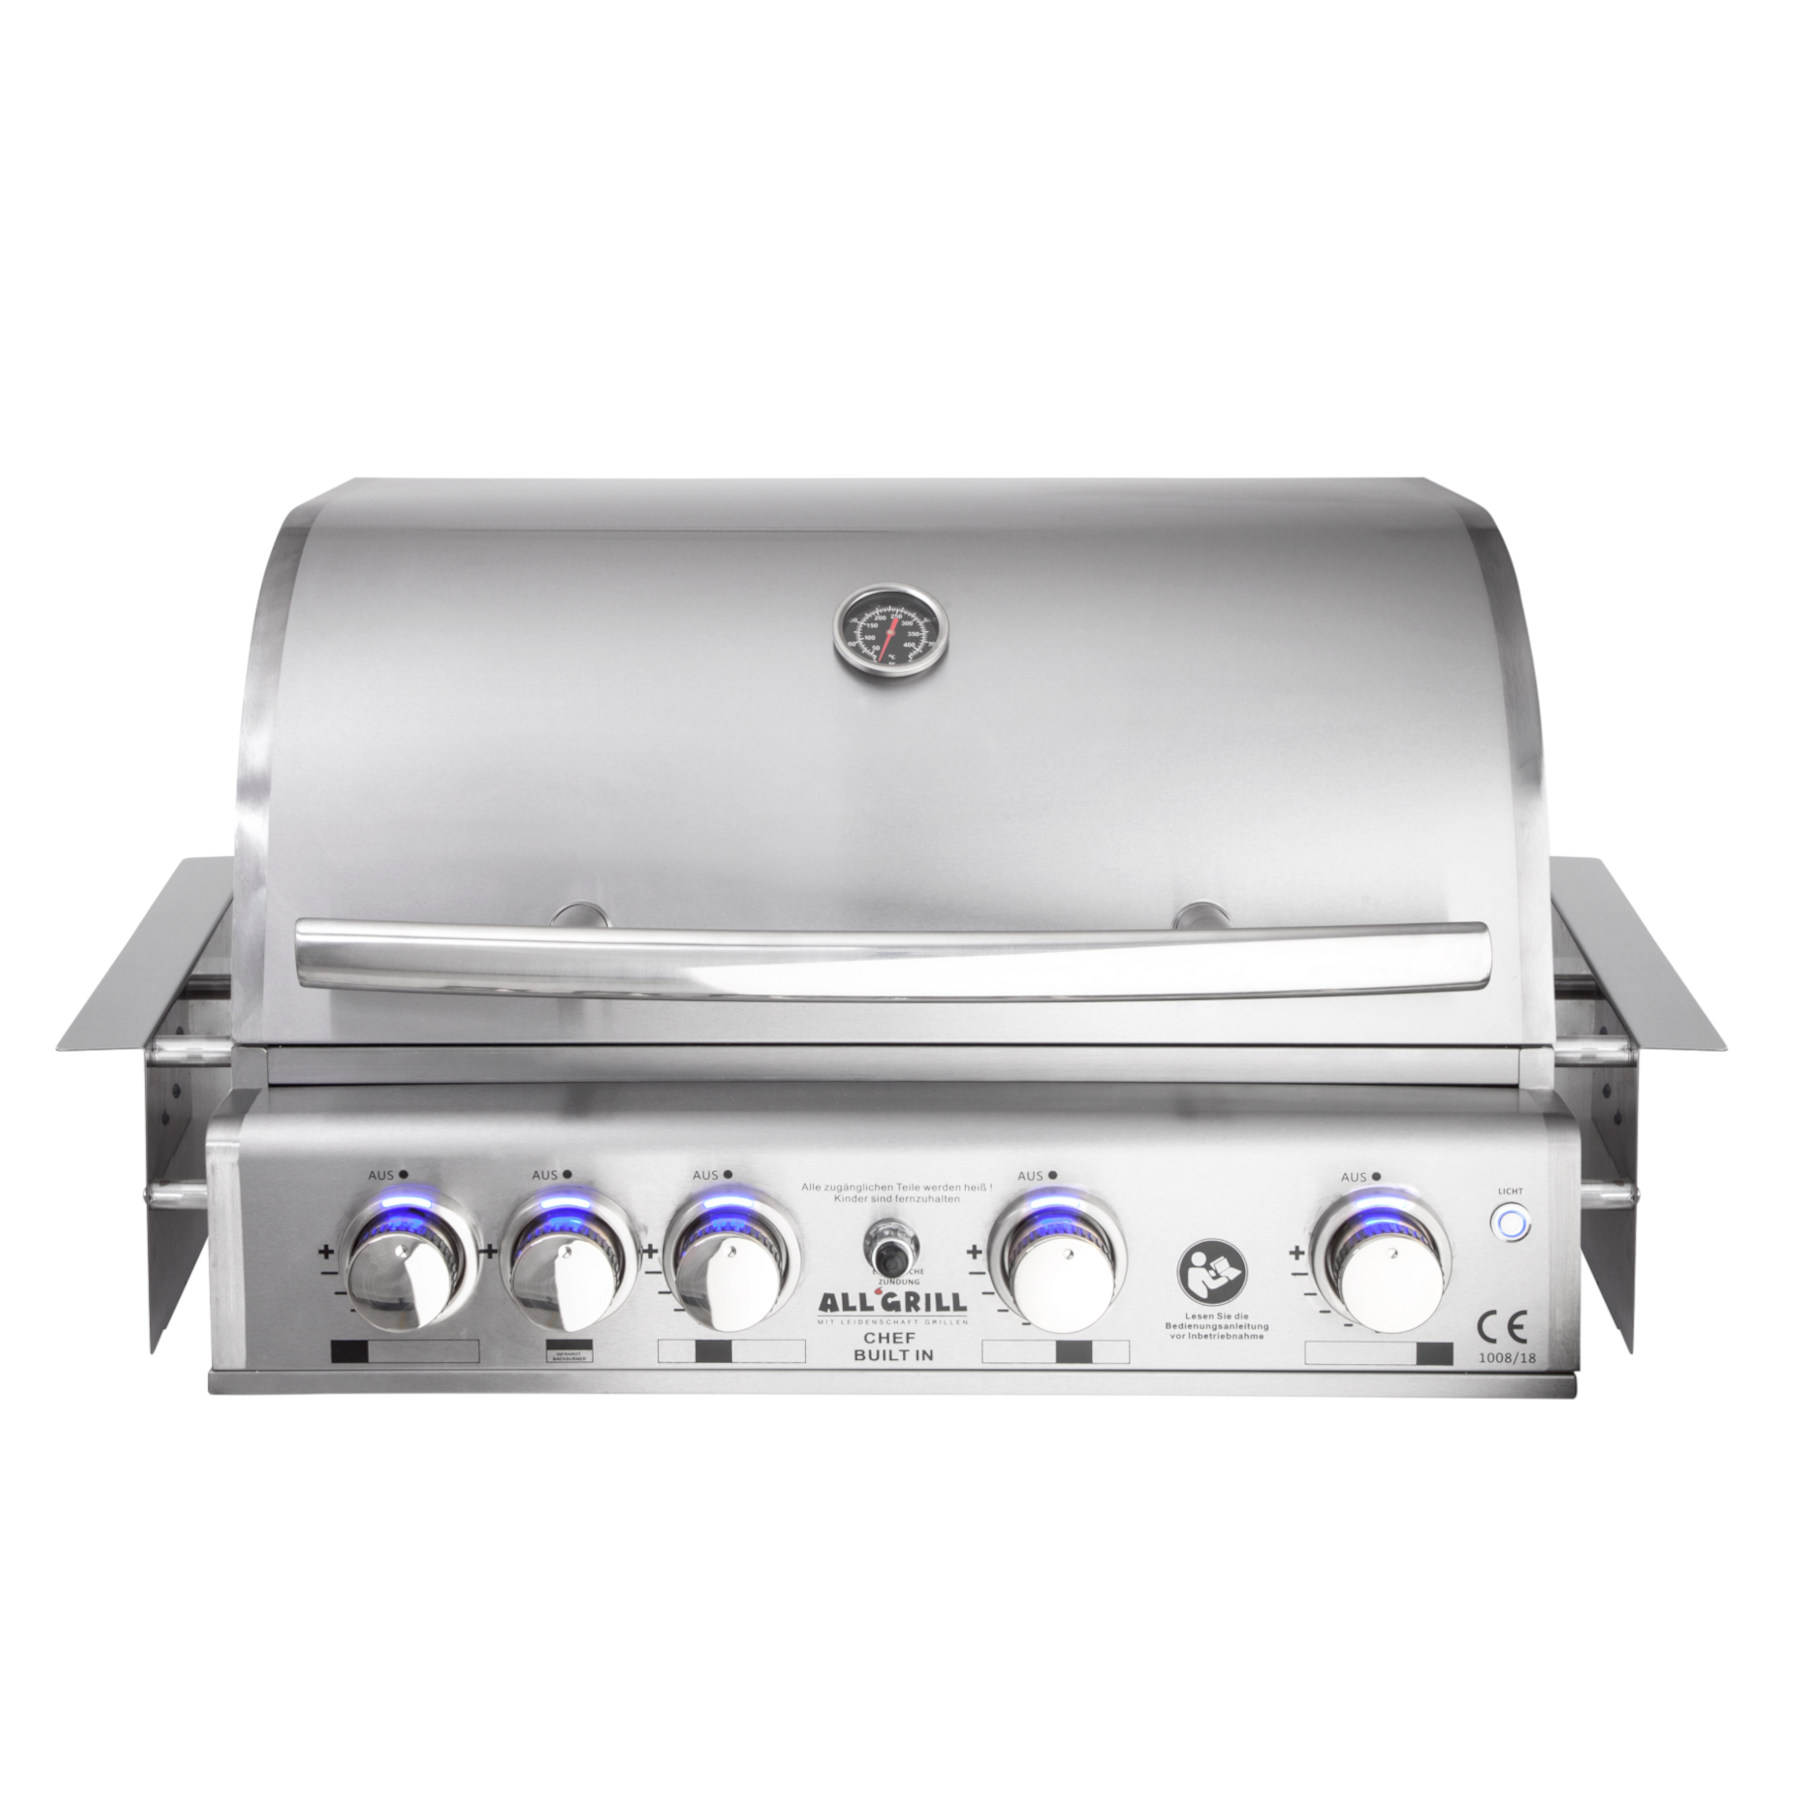 TOP-LINE - ALL'GRILL CHEF "L" - BUILT-IN mit Air System